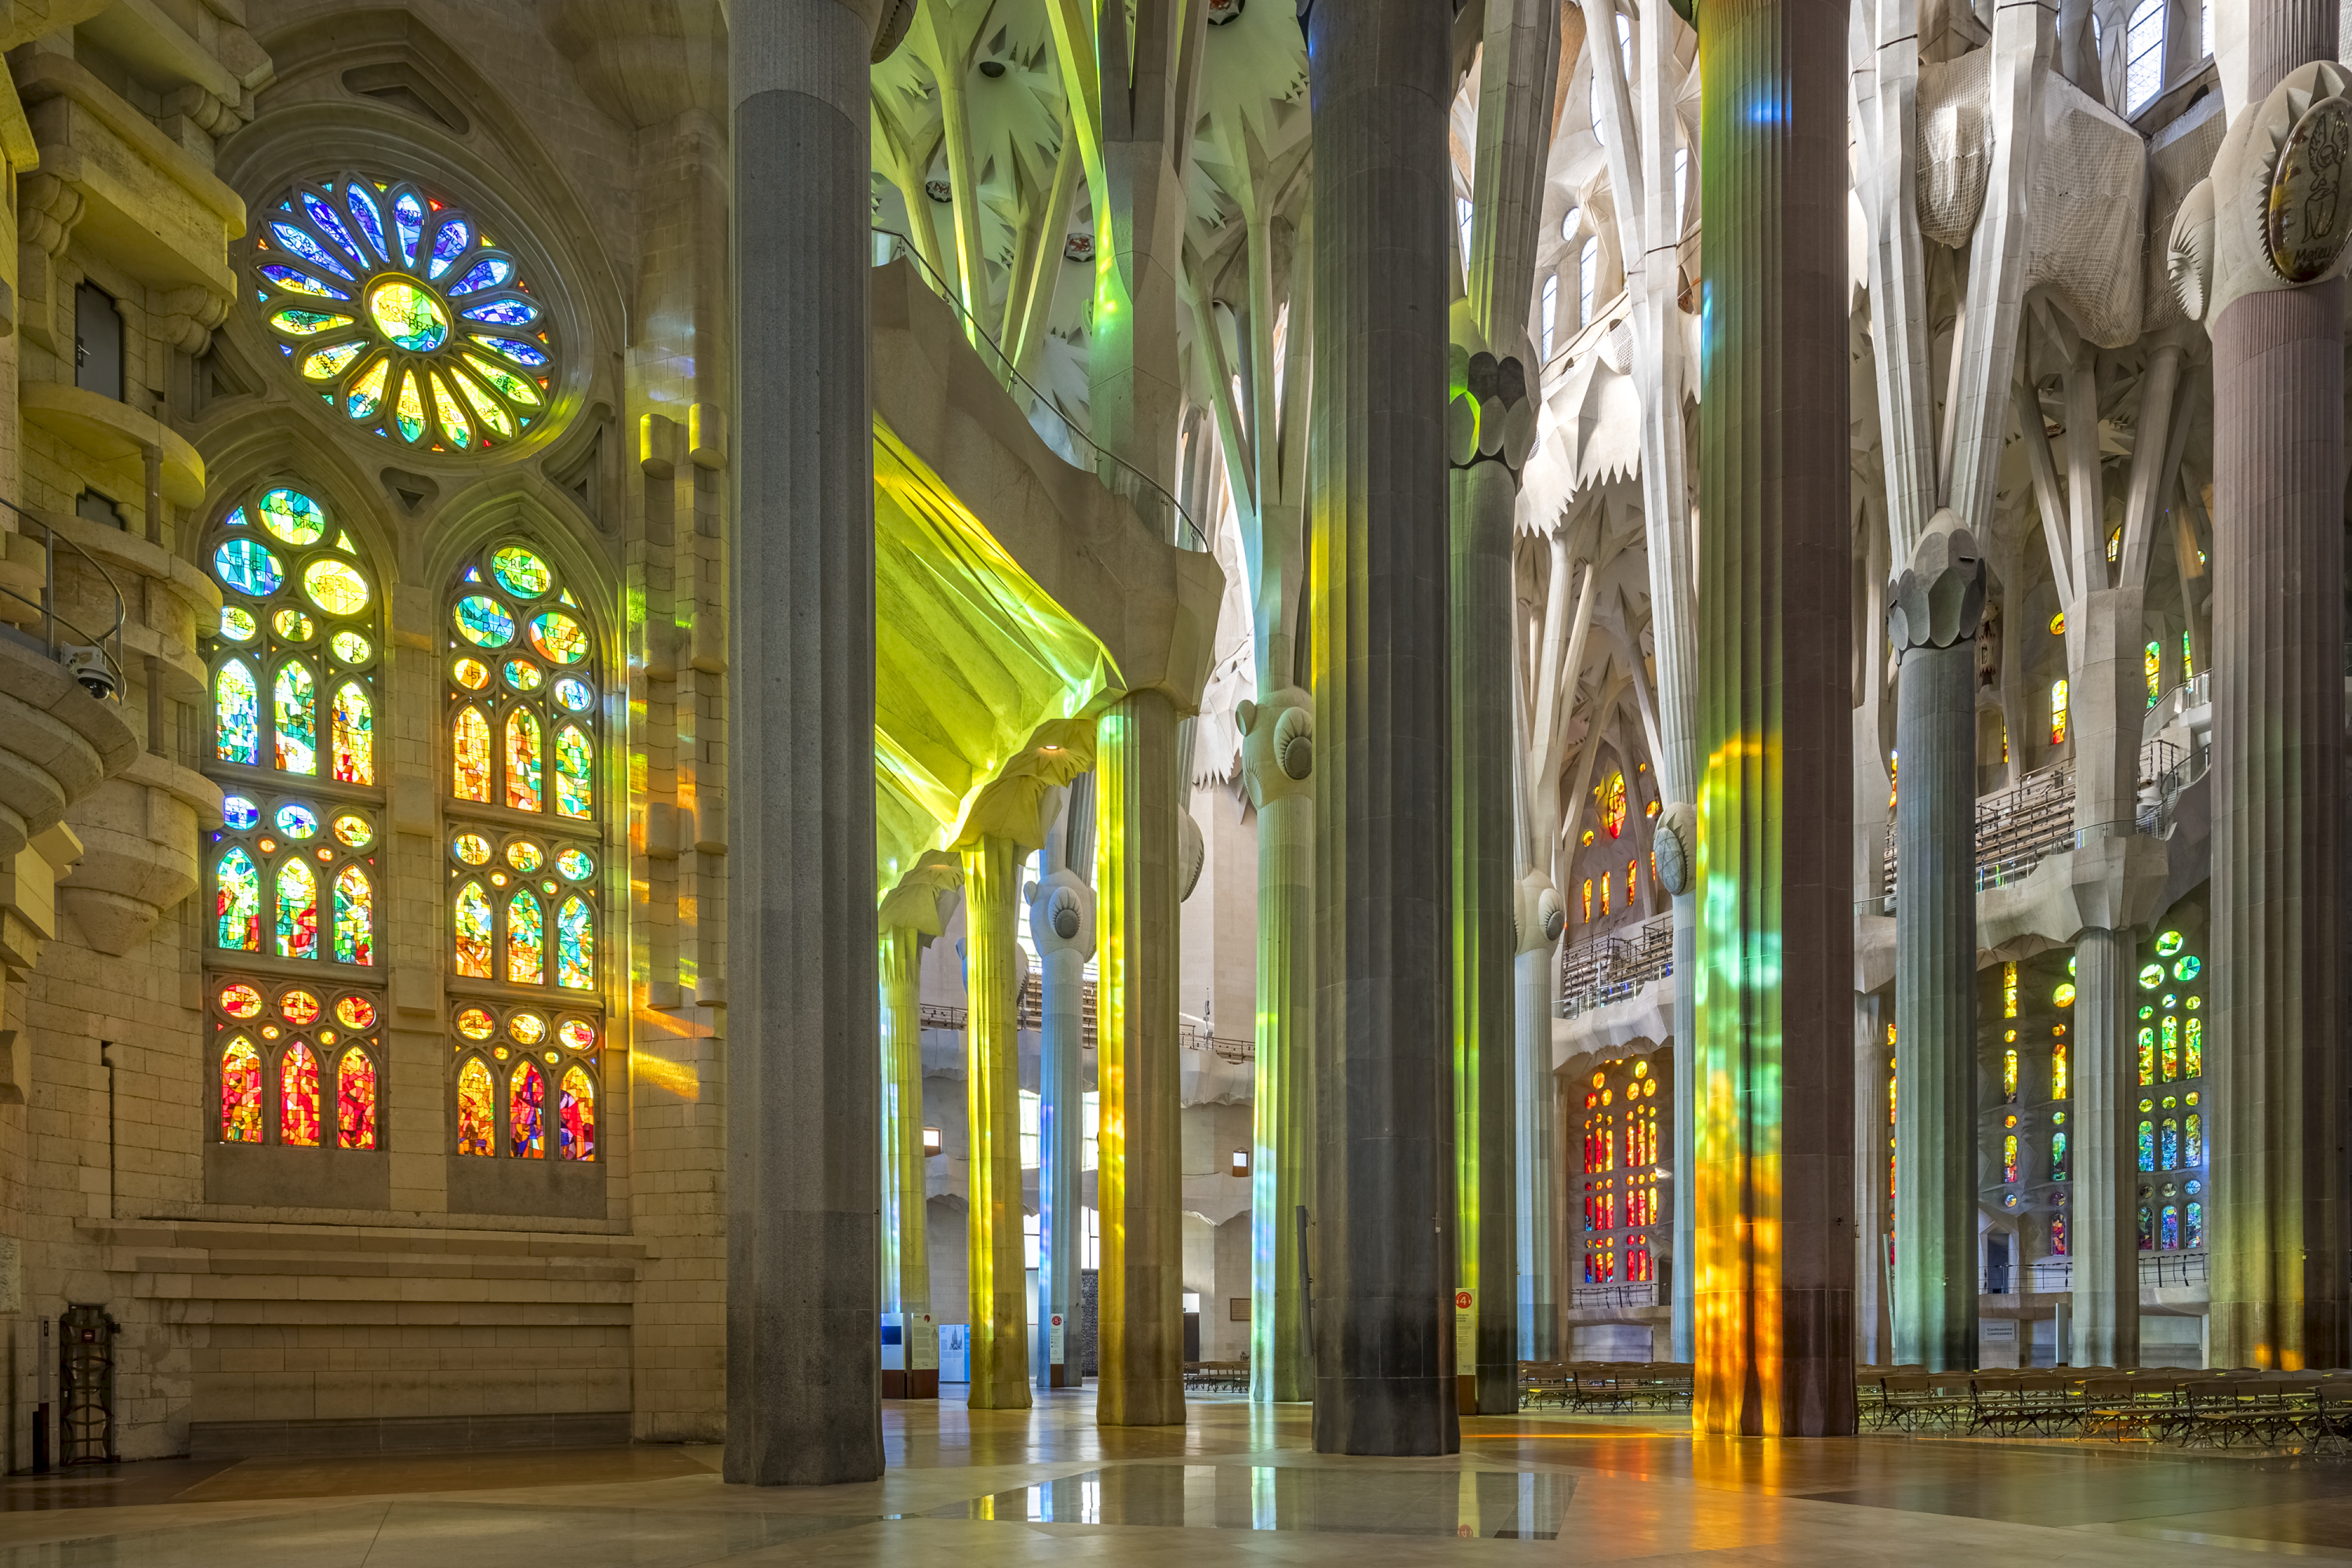 La Sagrada Família on Twitter: "Antoni #Gaudí channelled all his creativity, hard work and, above all, his heart and soul into the #SagradaFamília. Soon we'll be able to enjoy it again [Stained-glass